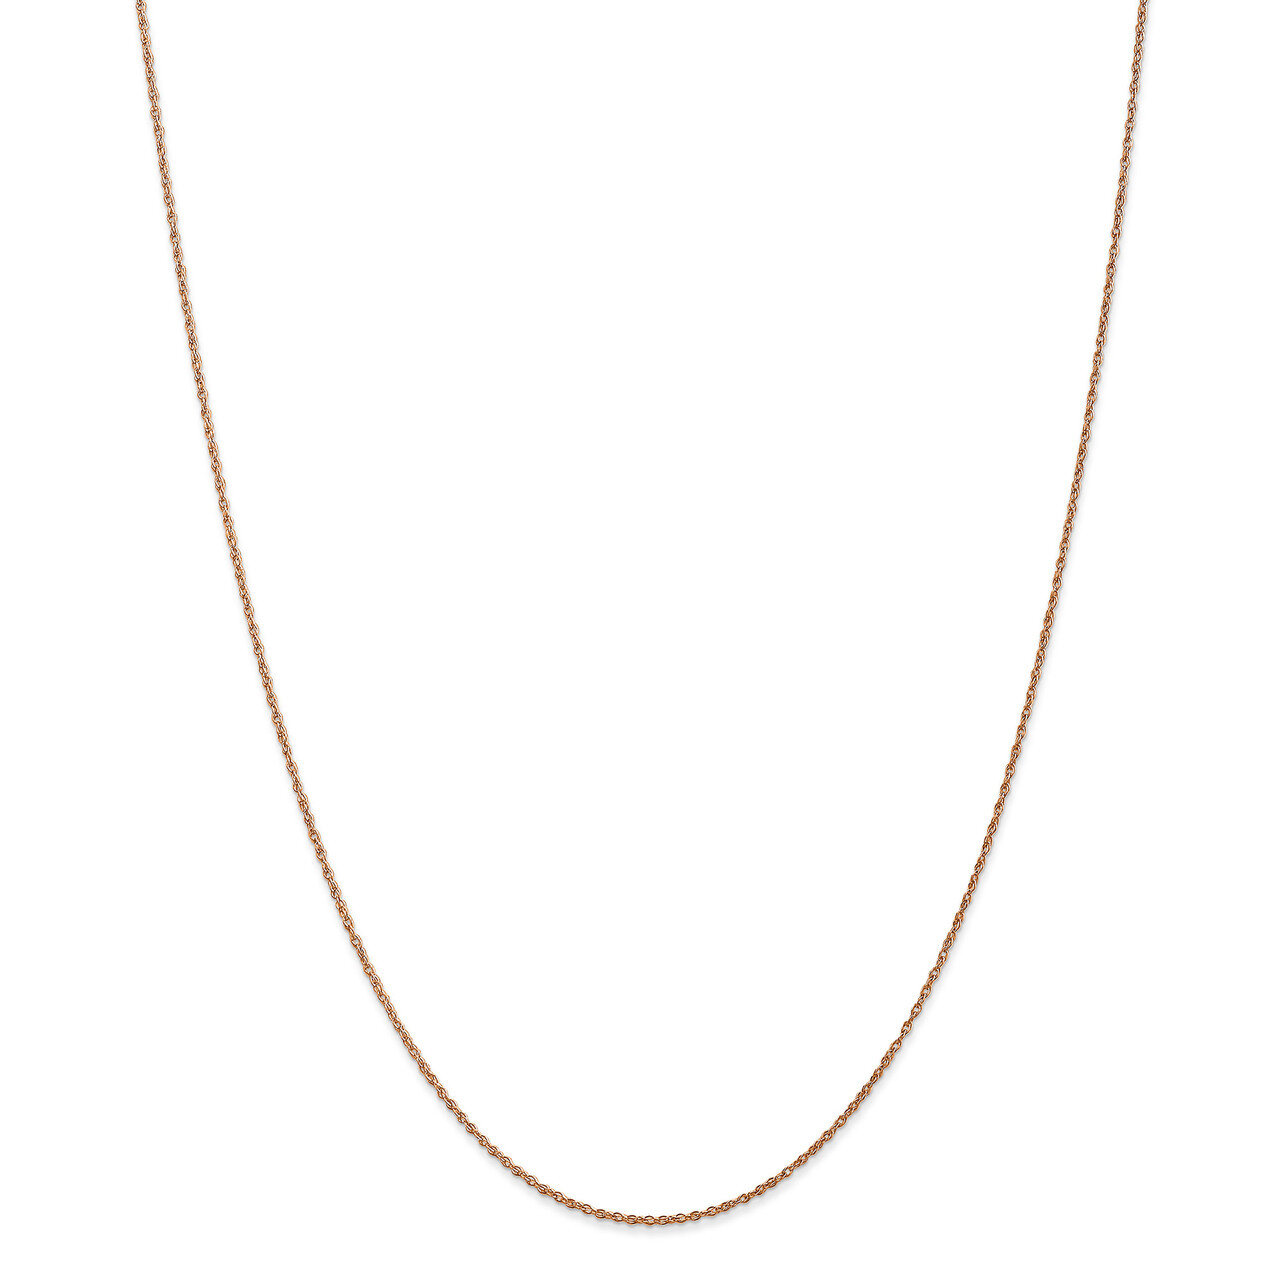 20 Inch 0.8mm Light-Baby Rope Chain 14k Rose Gold RSC35-20